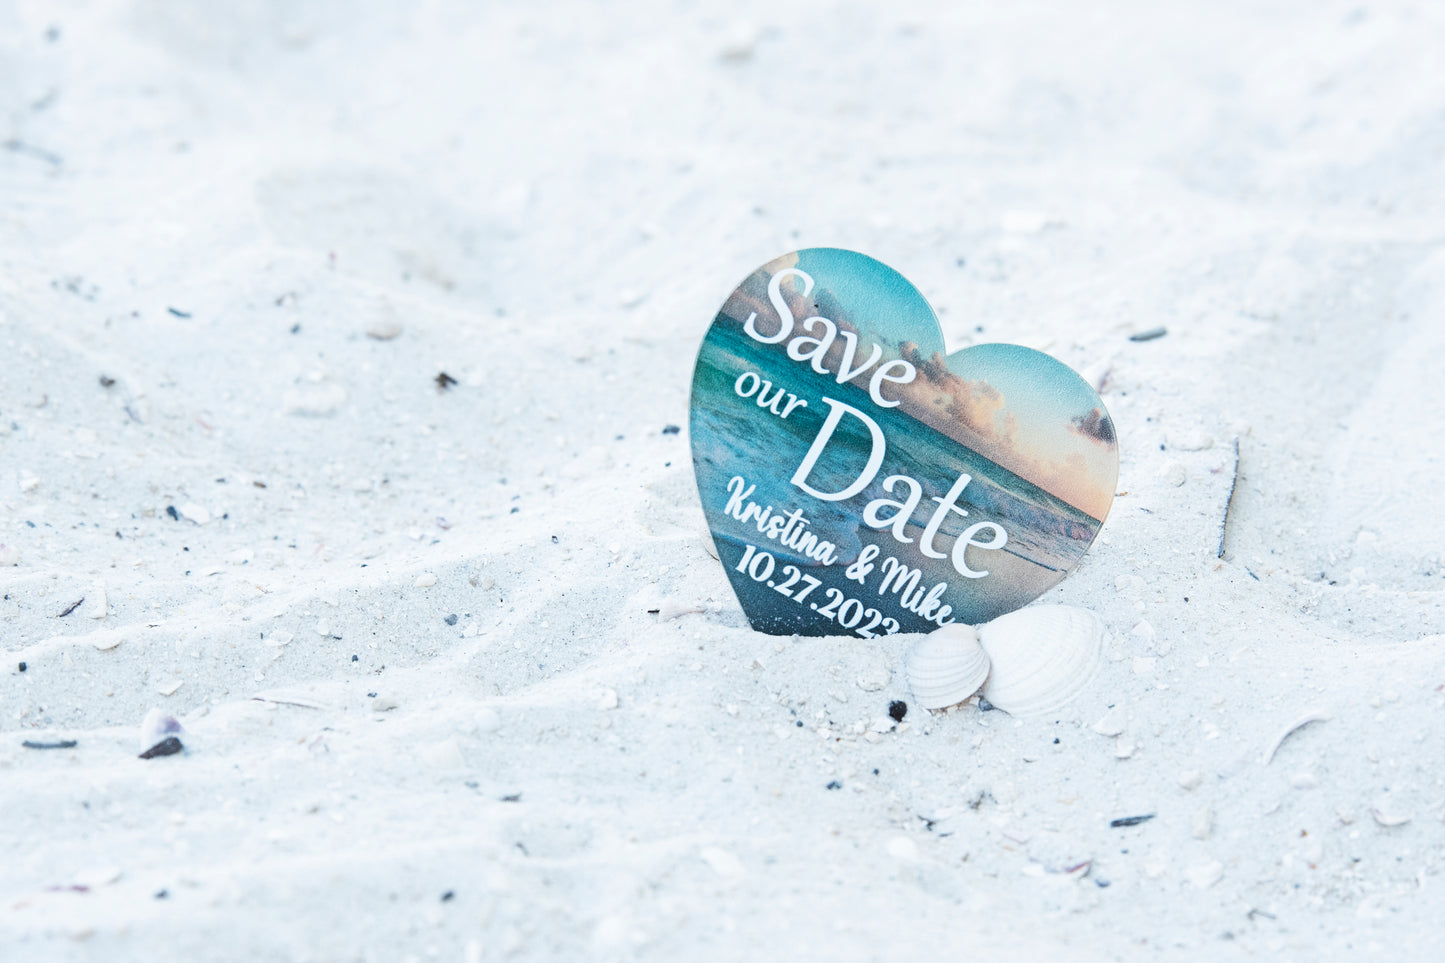 Personalized Heart-Shaped Acrylic Save the Date Magnets - Add a Unique Touch to Your Wedding